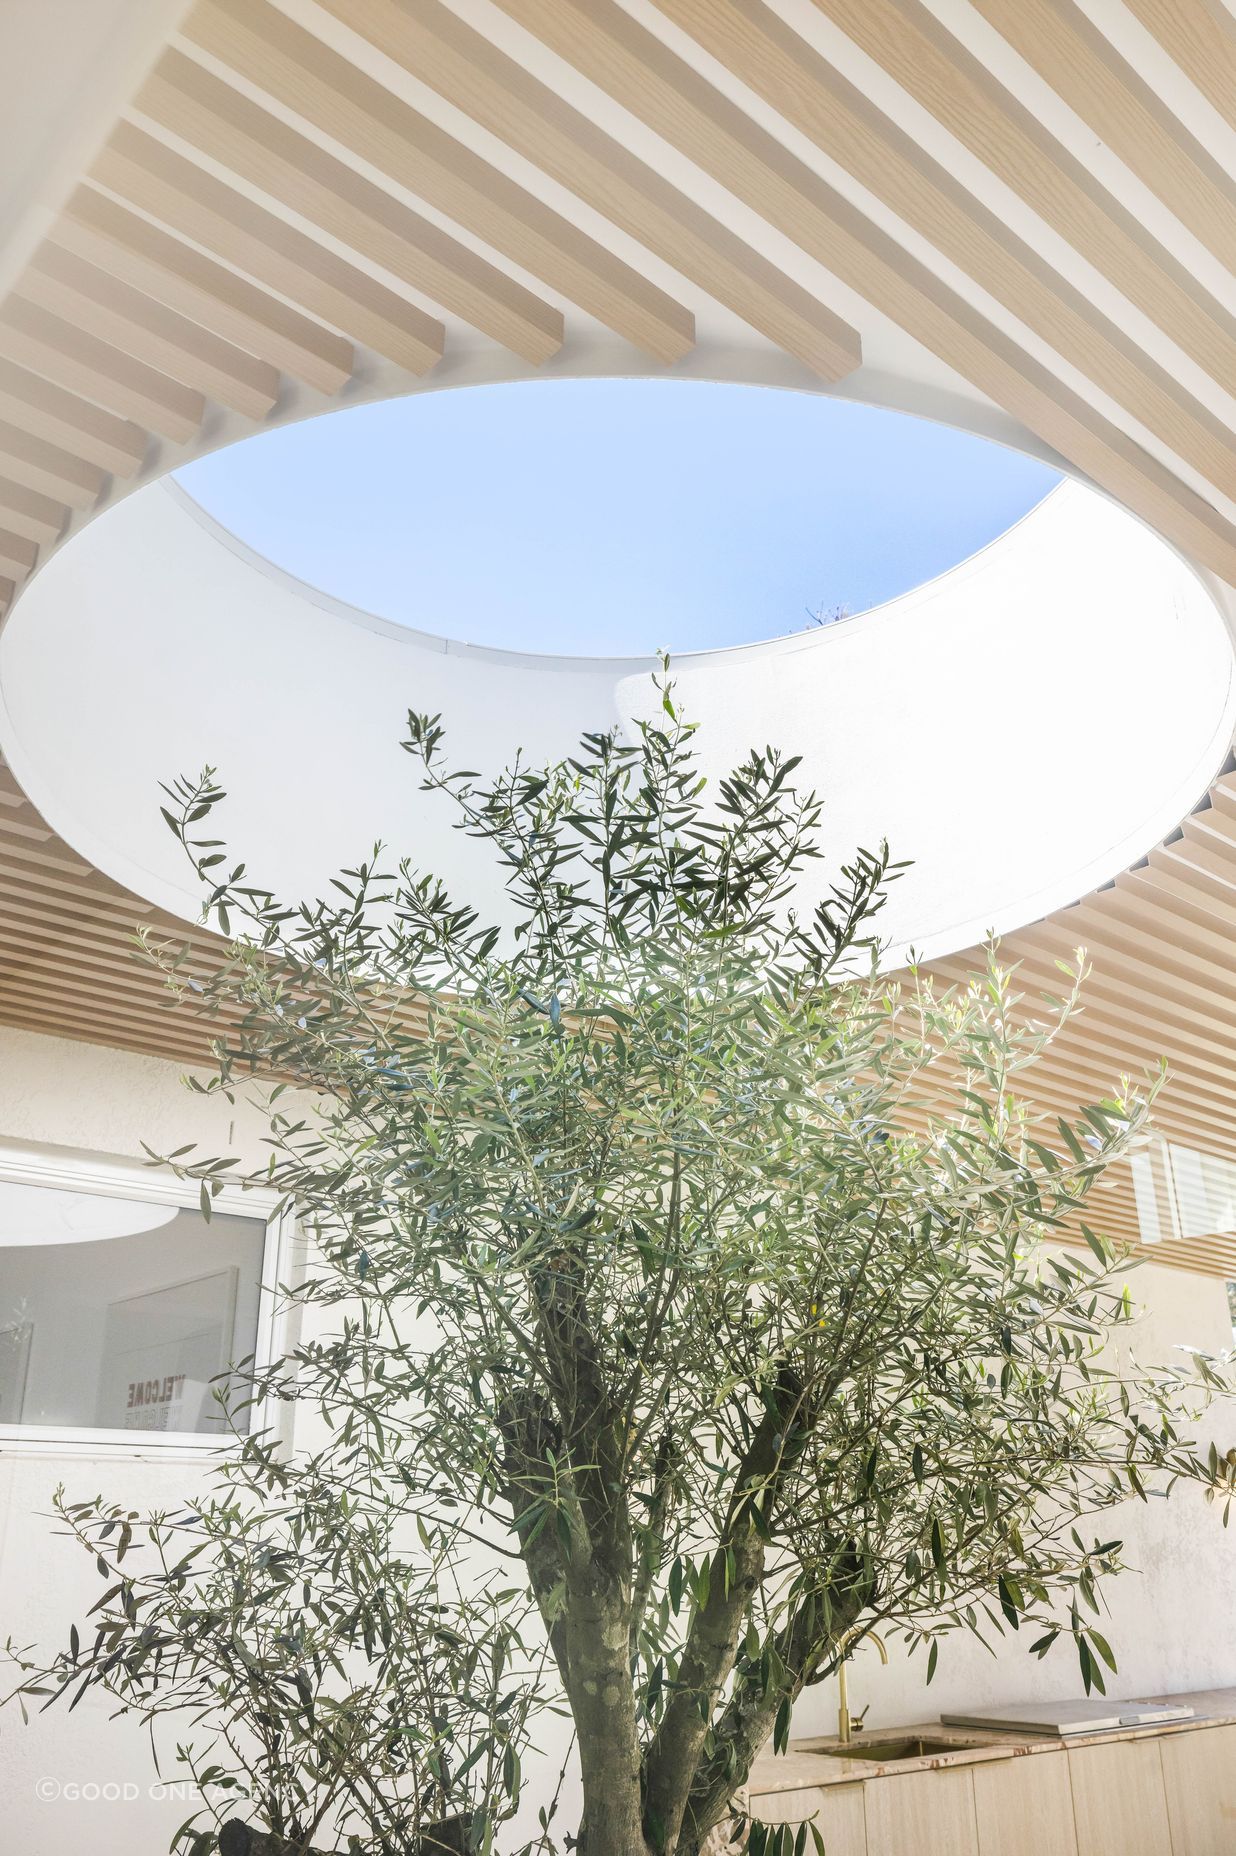 A skylight cut into the roof gives the olive tree light and encourages it to grow .